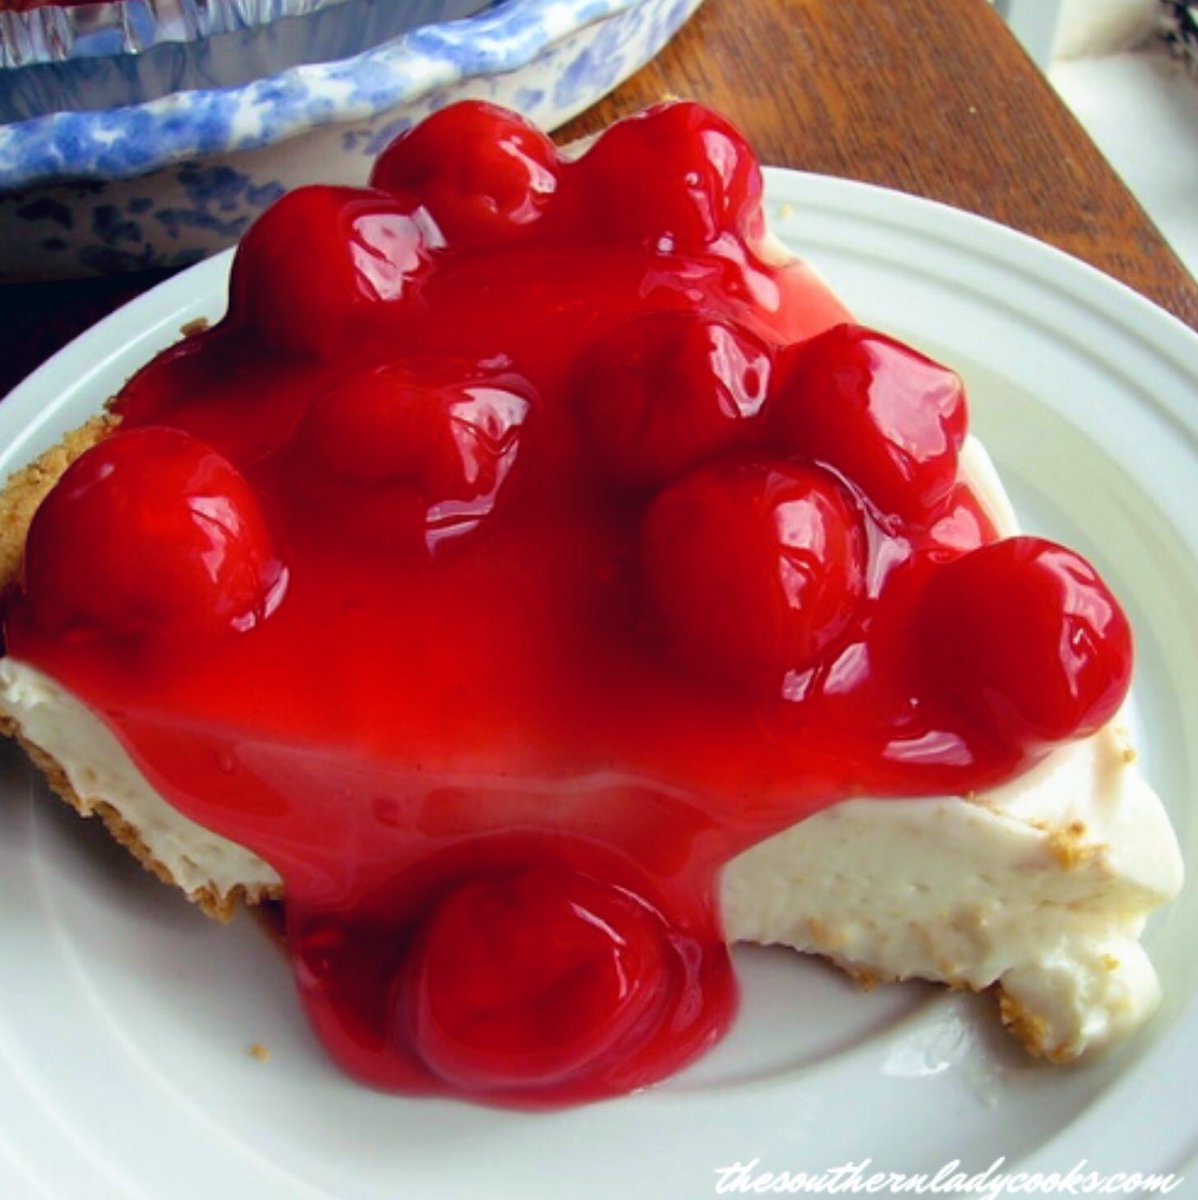 It’s #NationalCherryCheesecakeDay and this classic recipe is the best dessert ever and it’s no bake! #cherry #cheesecake #pie #dessert #classic #easy #nobake #delicious #cherries #recipe ➡️ thesouthernladycooks.com/cherry-cream-c…